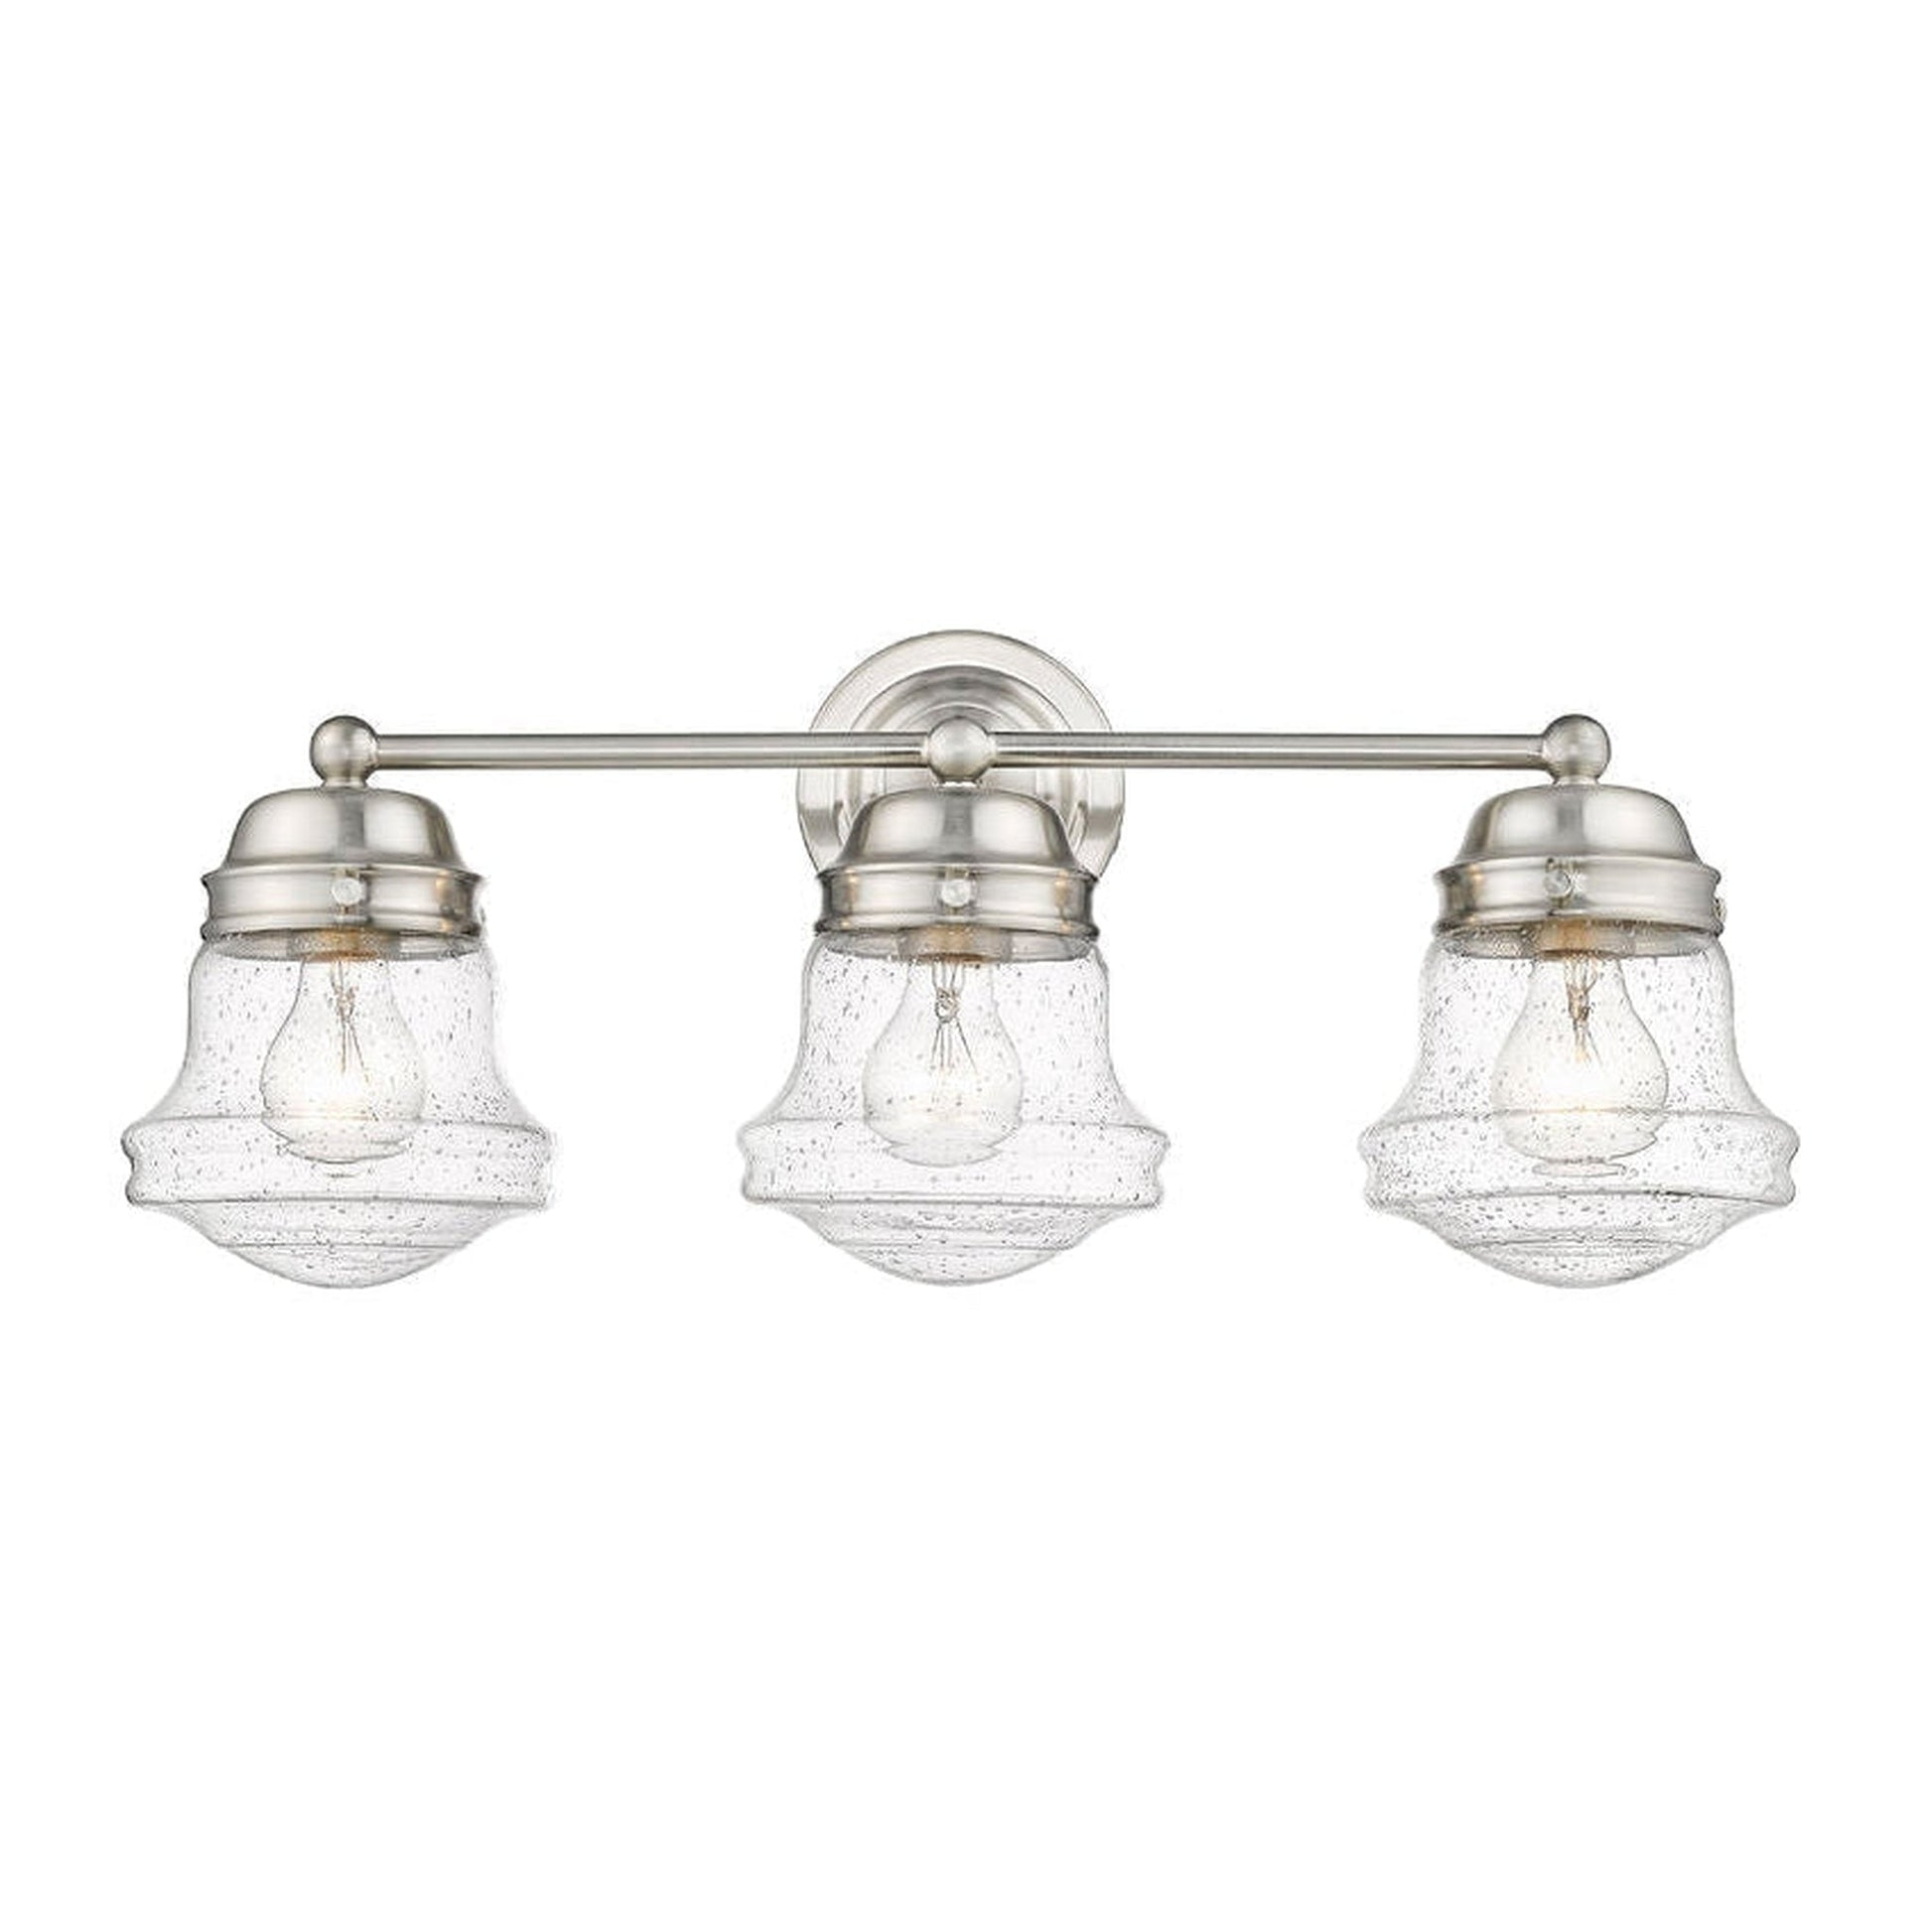 Z-Lite Vaughn 23" 3-Light Brushed Nickel Vanity Light With Clear Seedy Glass Shade